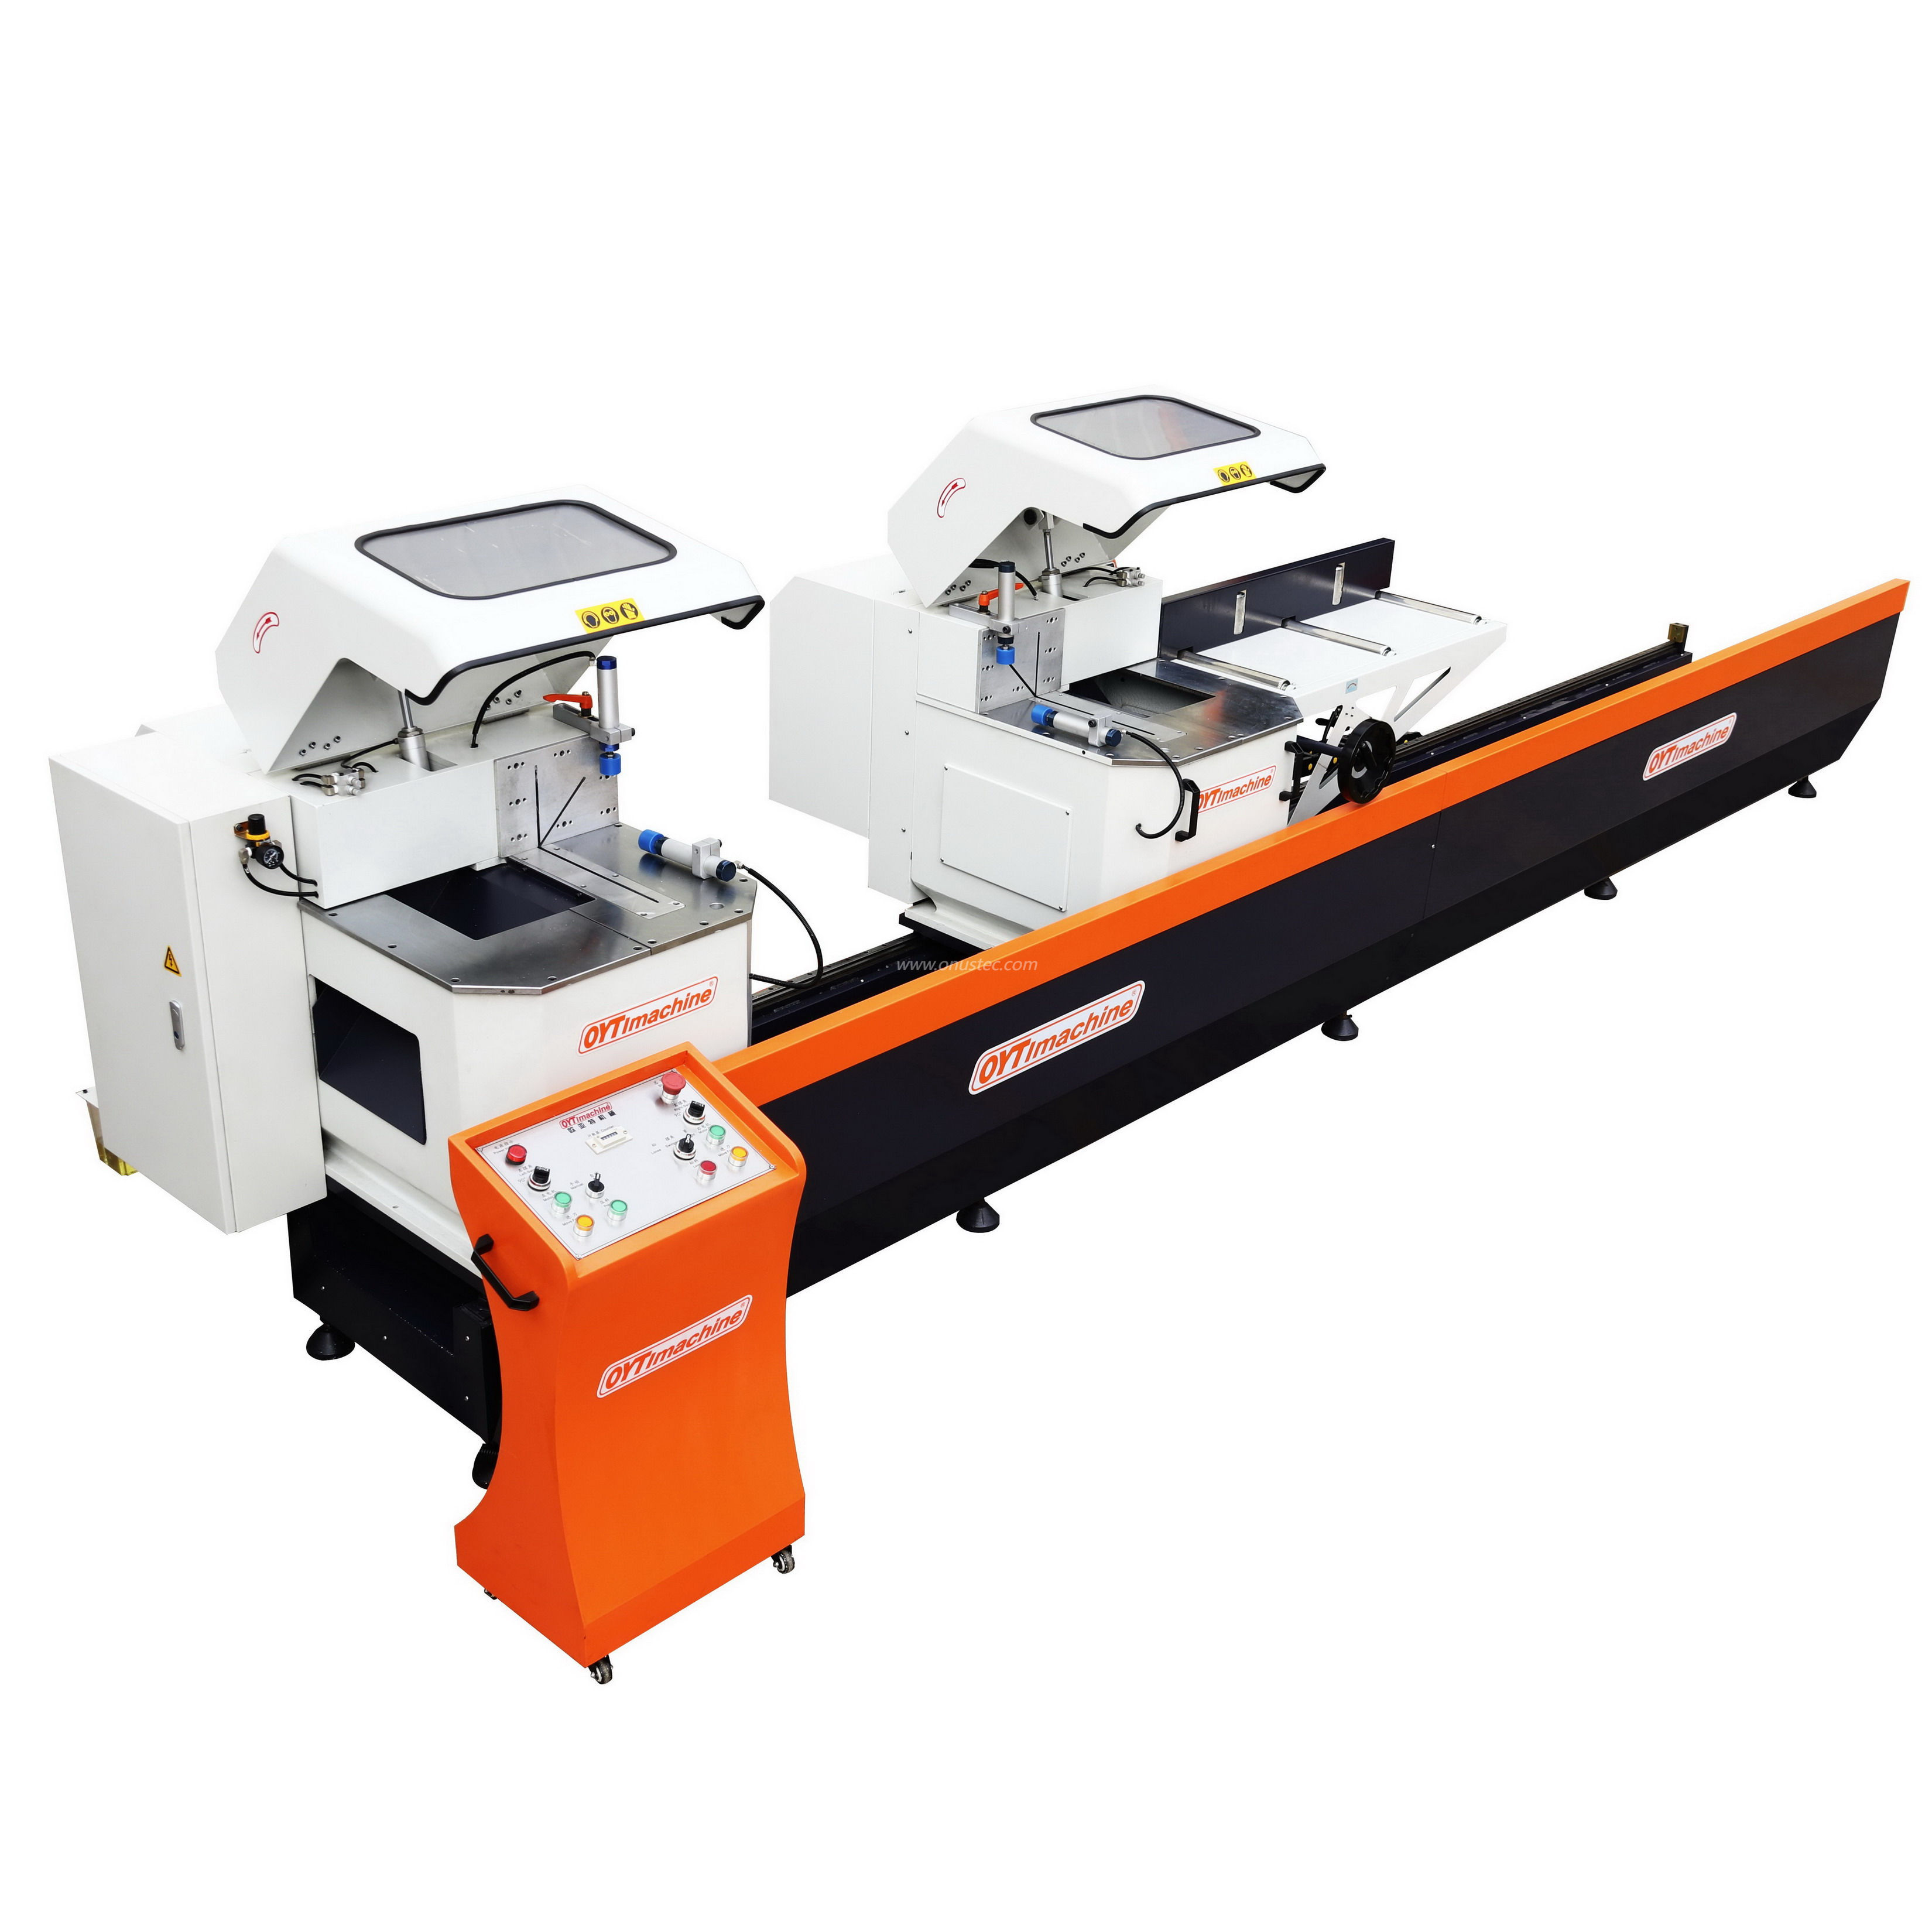 Large Heavy Duty Digital Display Double Mitre Saw